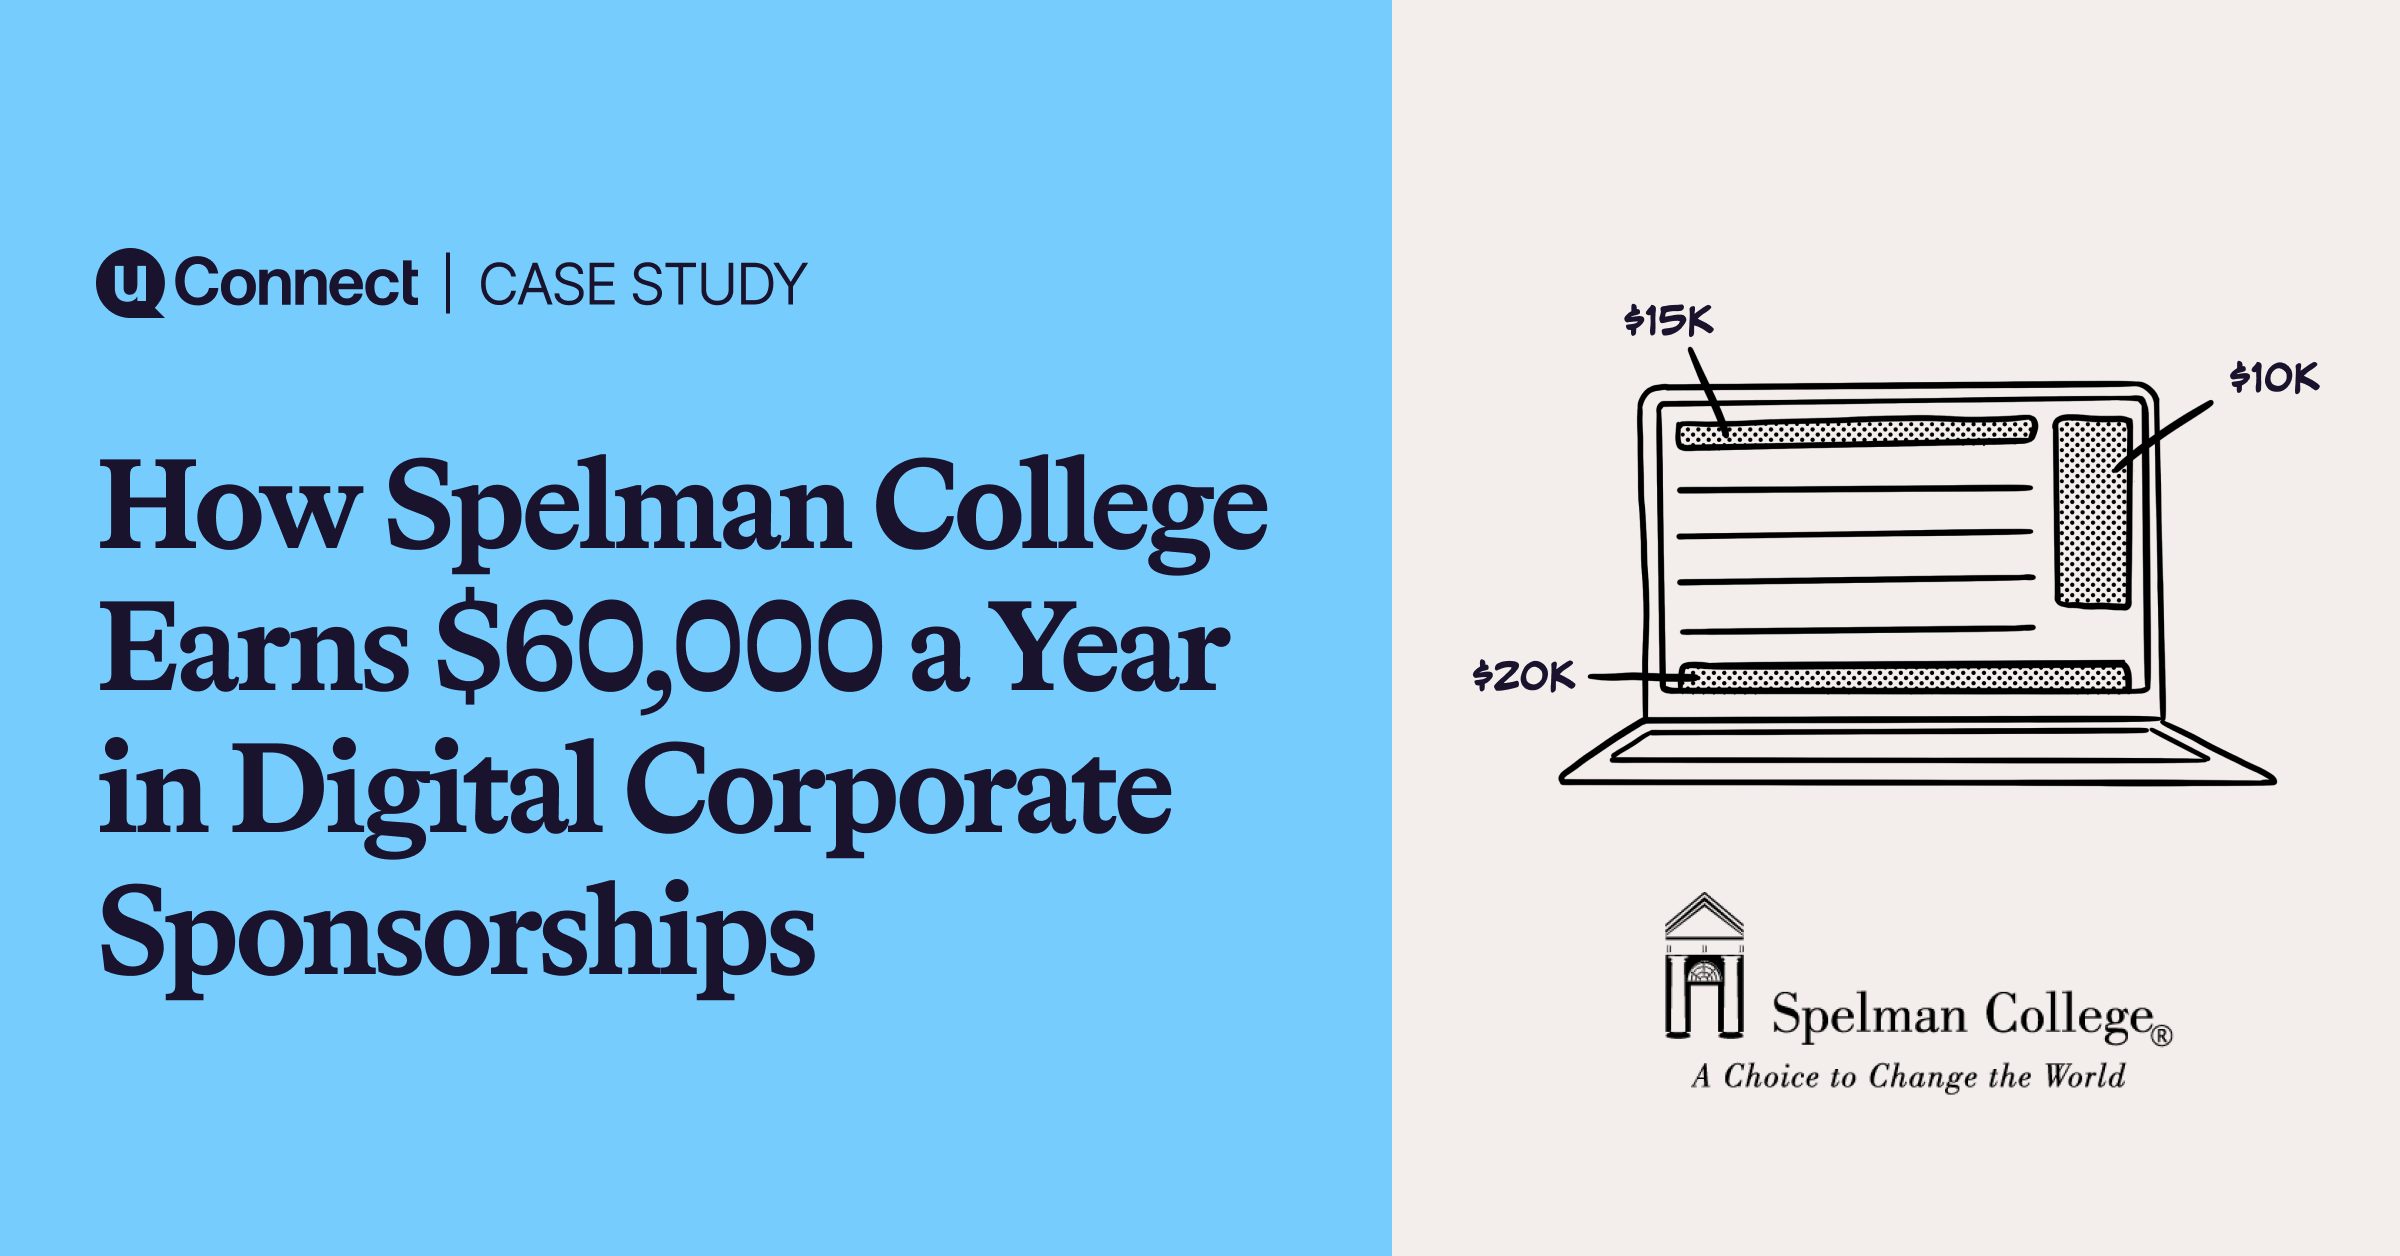 How Spelman College Earns $60,000 a Year in Digital Corporate Sponsorships